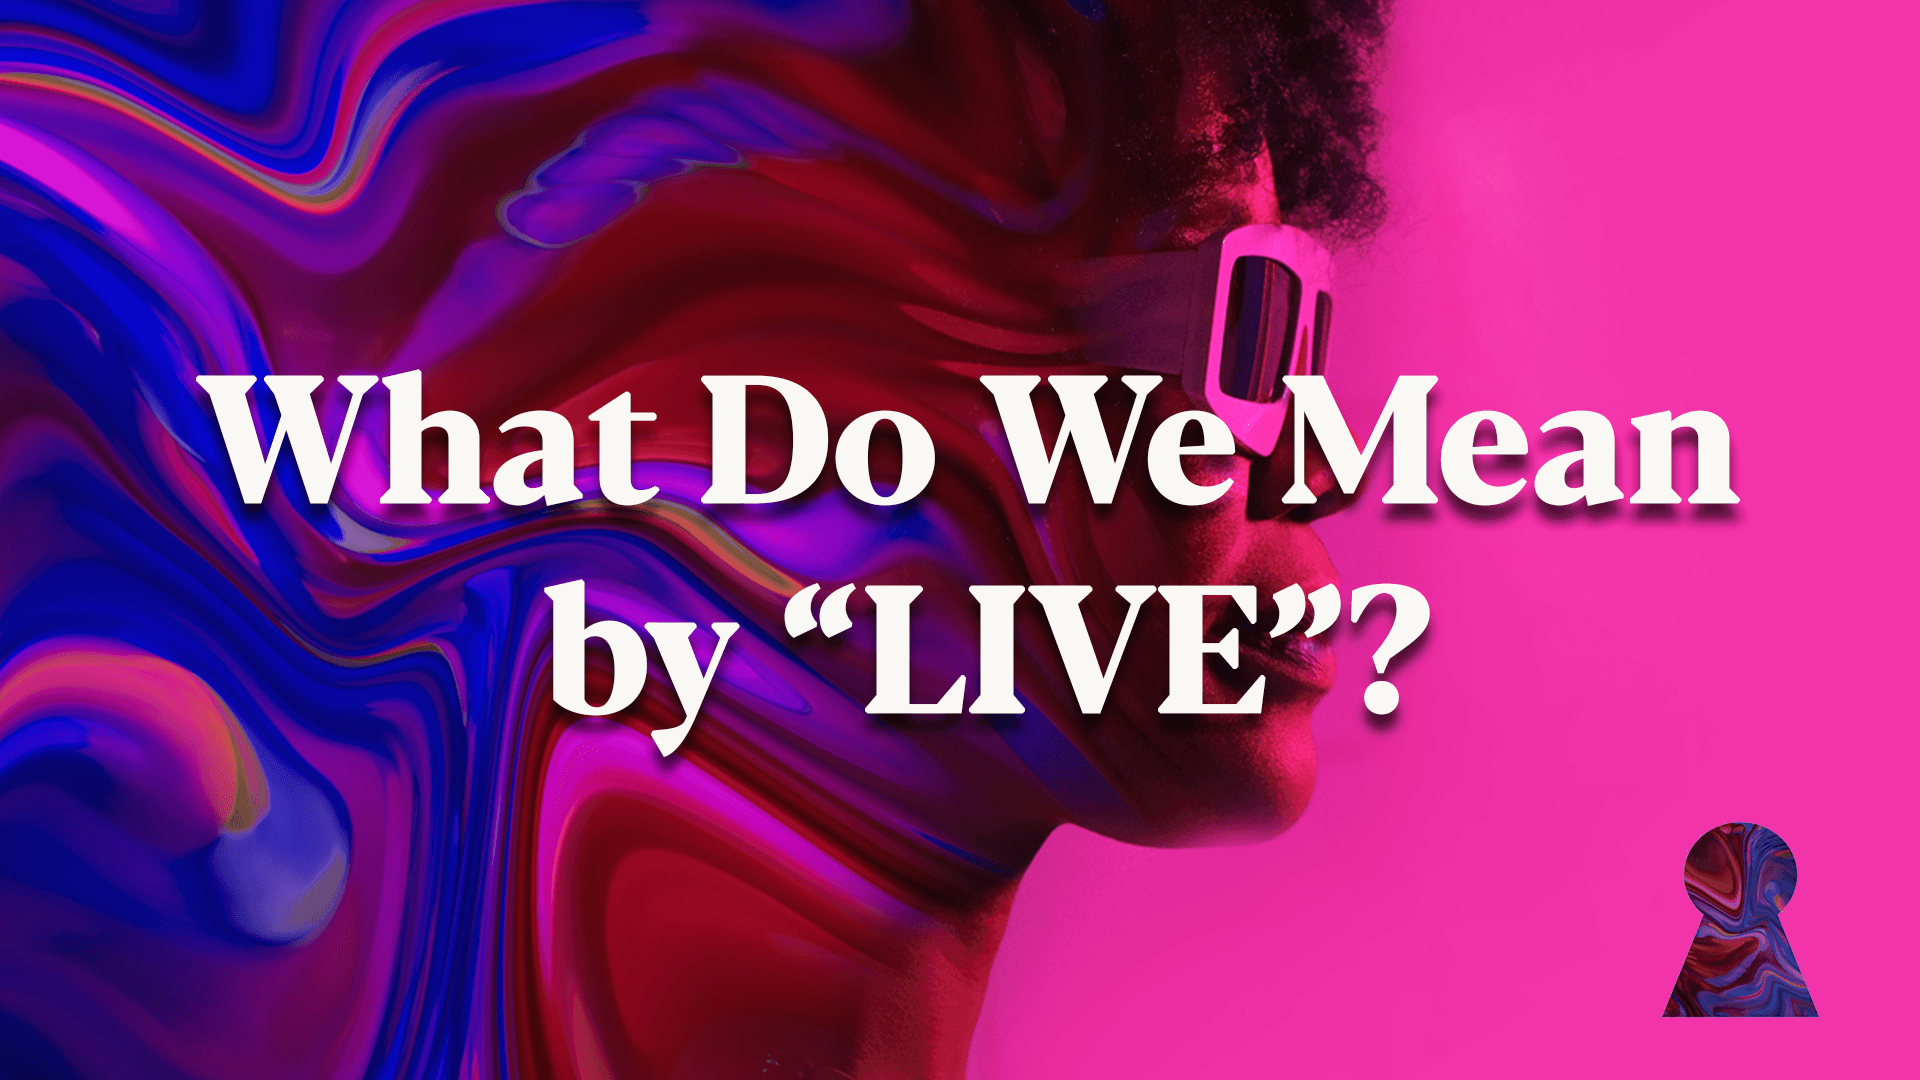 What Do We Mean by Live?